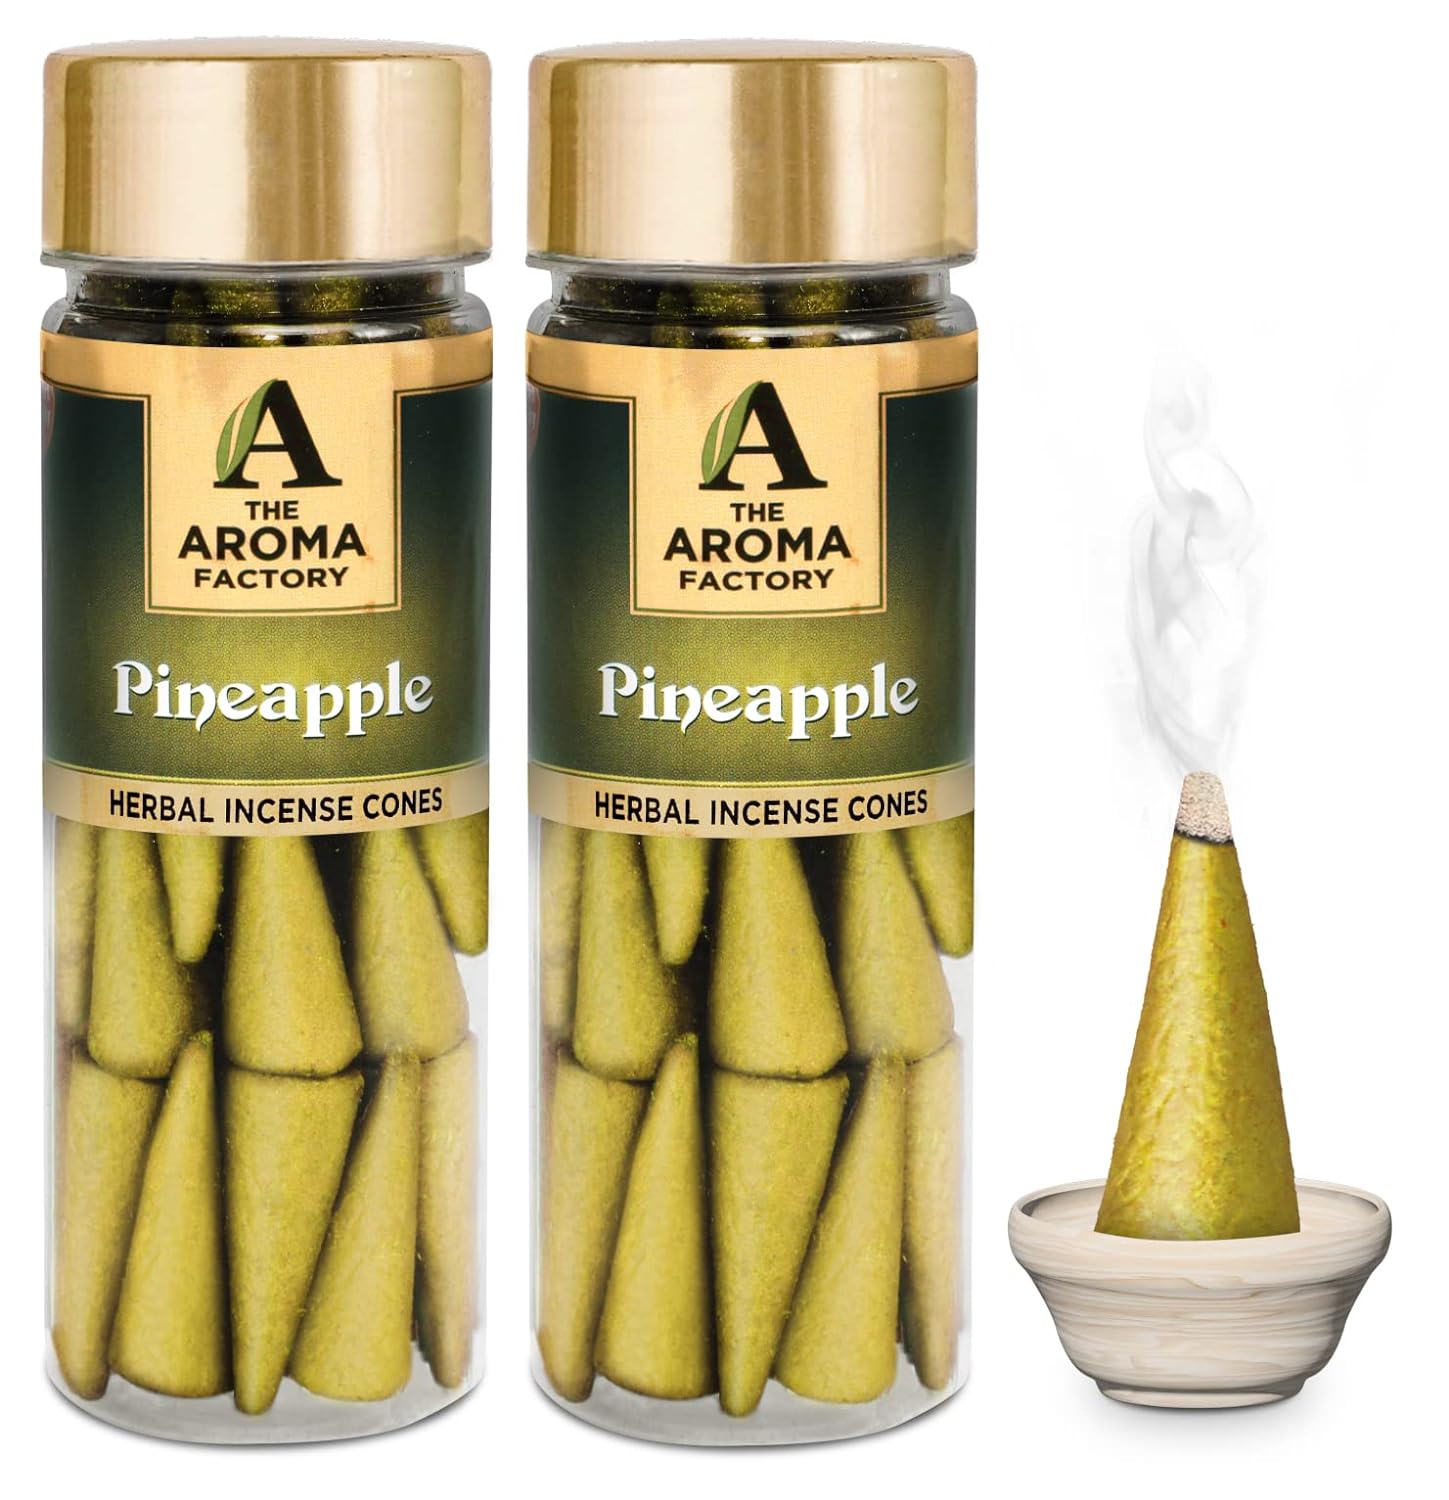 The Aroma Factory Incense Dhoop Cone for Pooja, Pineapple (100% Herbal & 0% Charcoal) 2 Bottles x 30 Cones